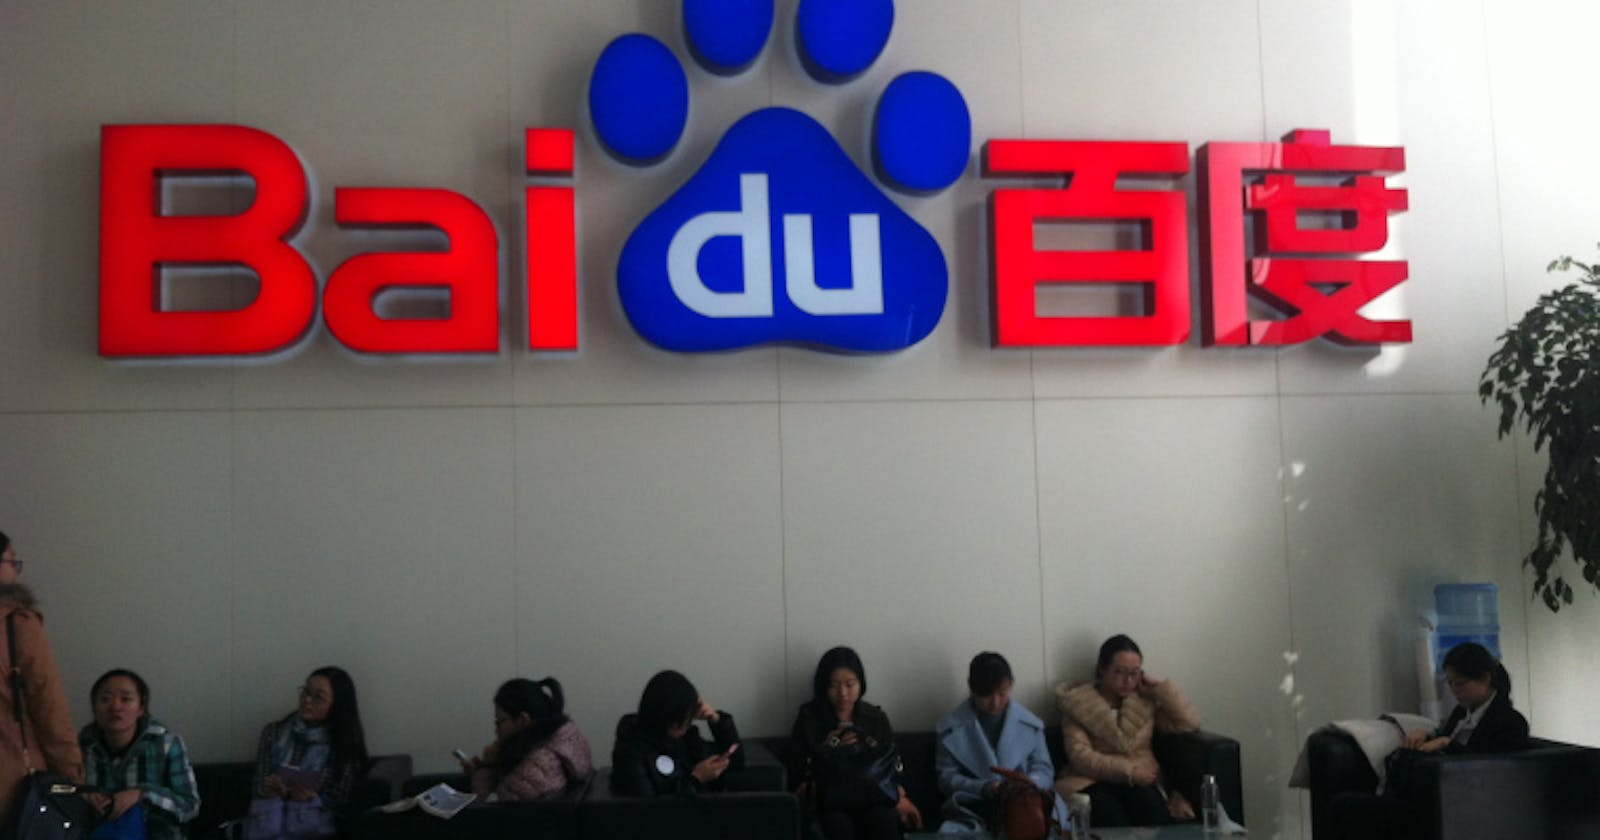 Baidu’s chief scientist, who led its AI research, is leaving the company